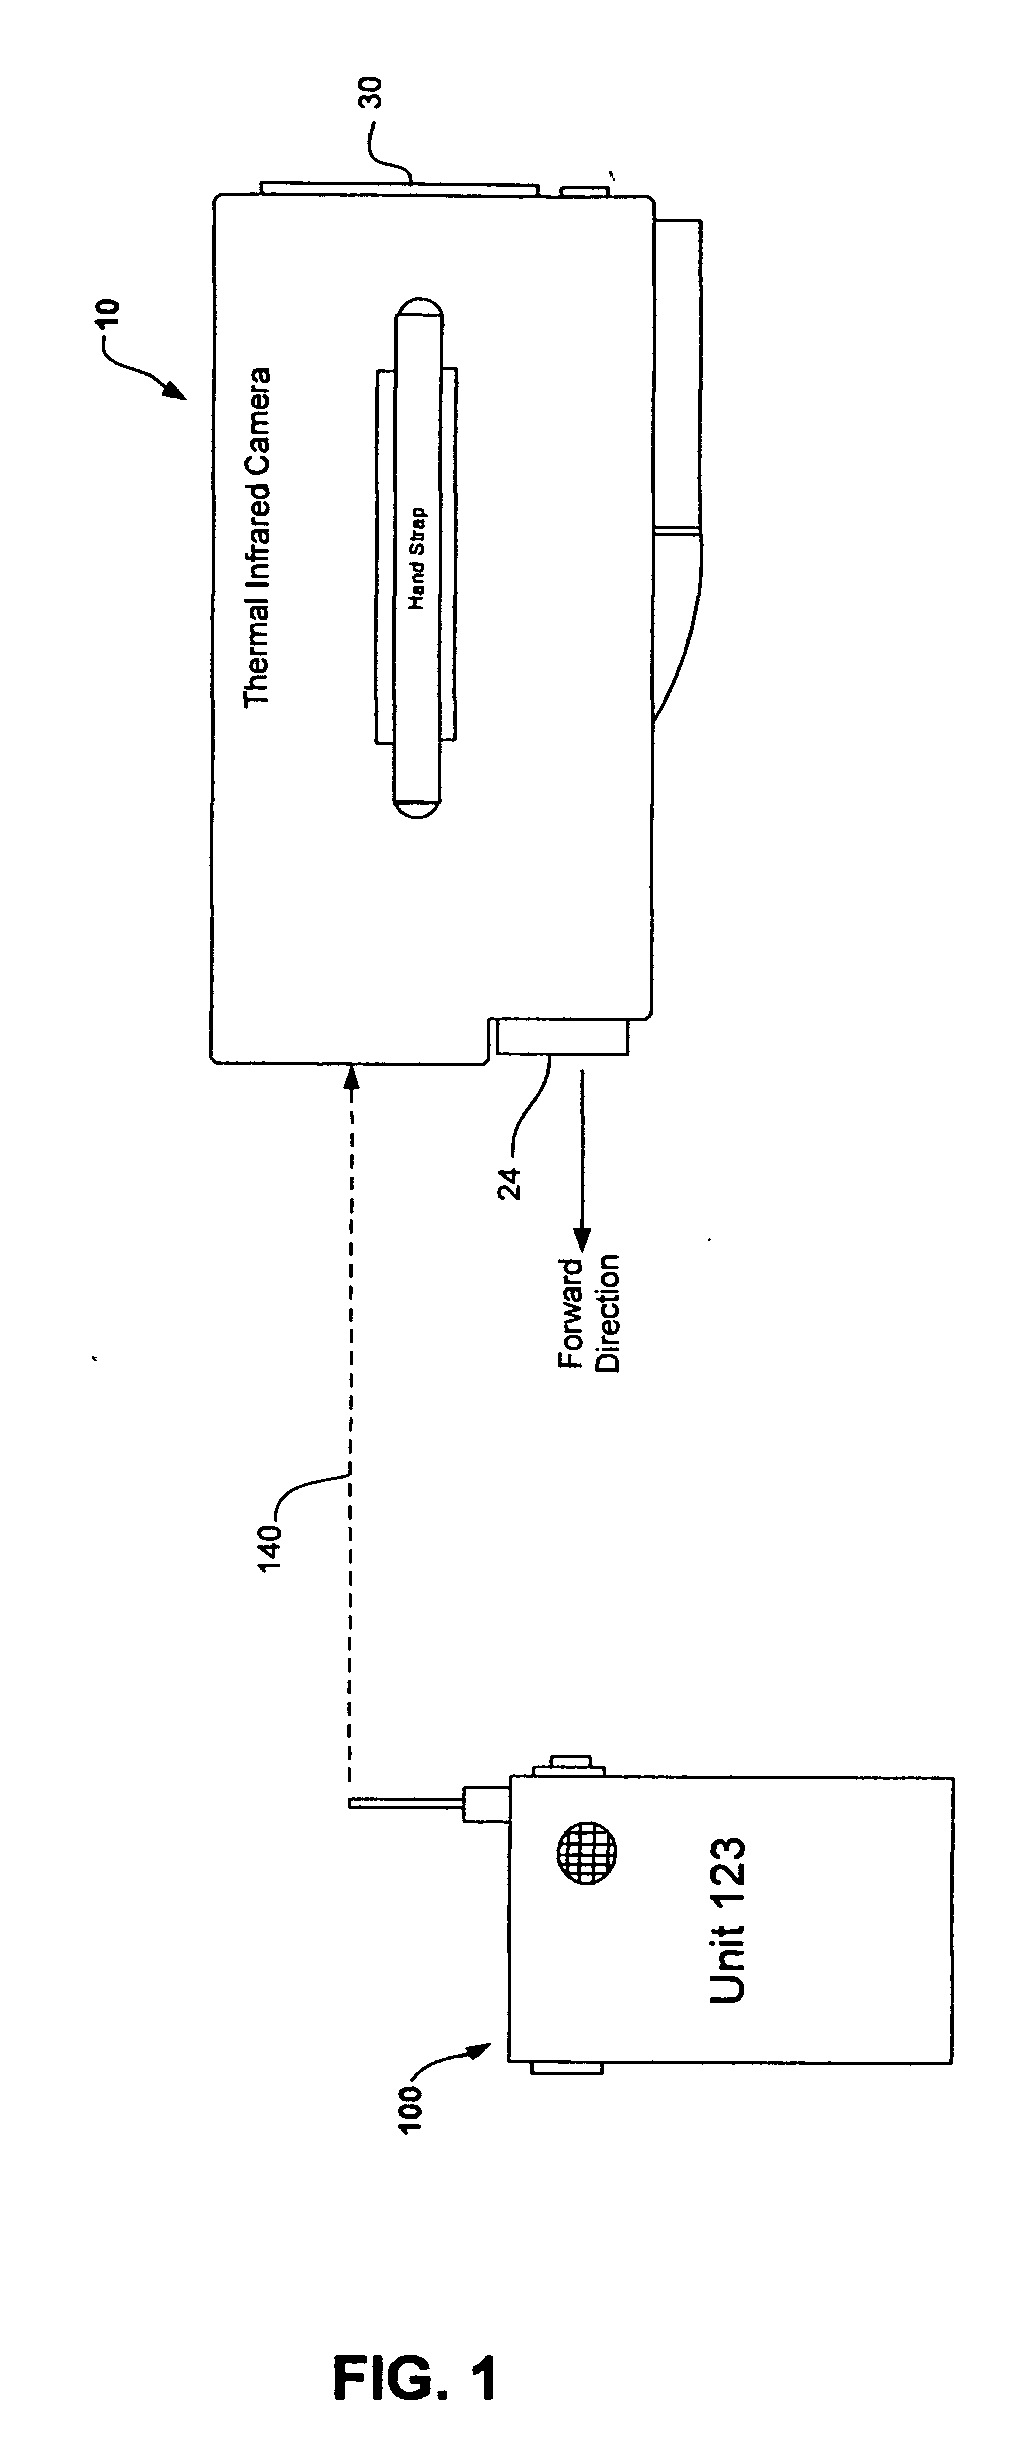 Thermal infrared camera tracking system utilizing receive signal strength